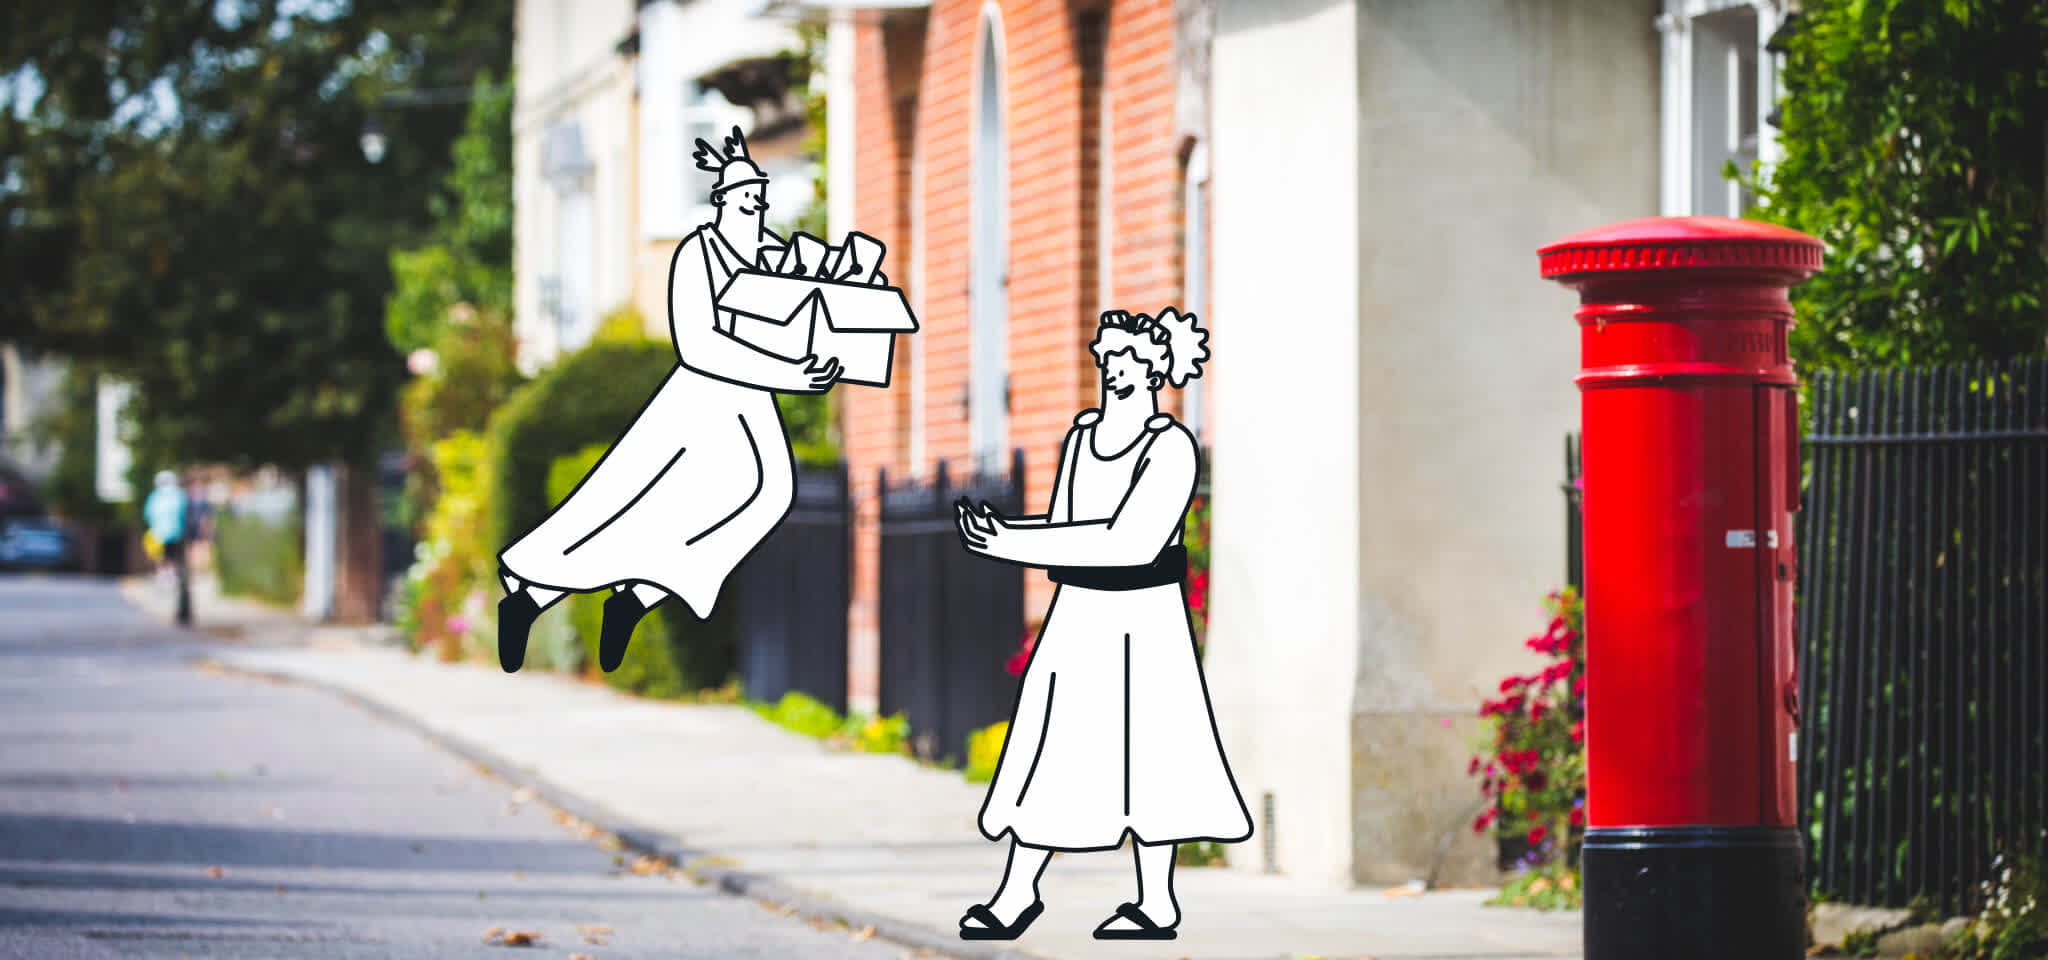 Hermes is delivering letters to a Goddess in the street